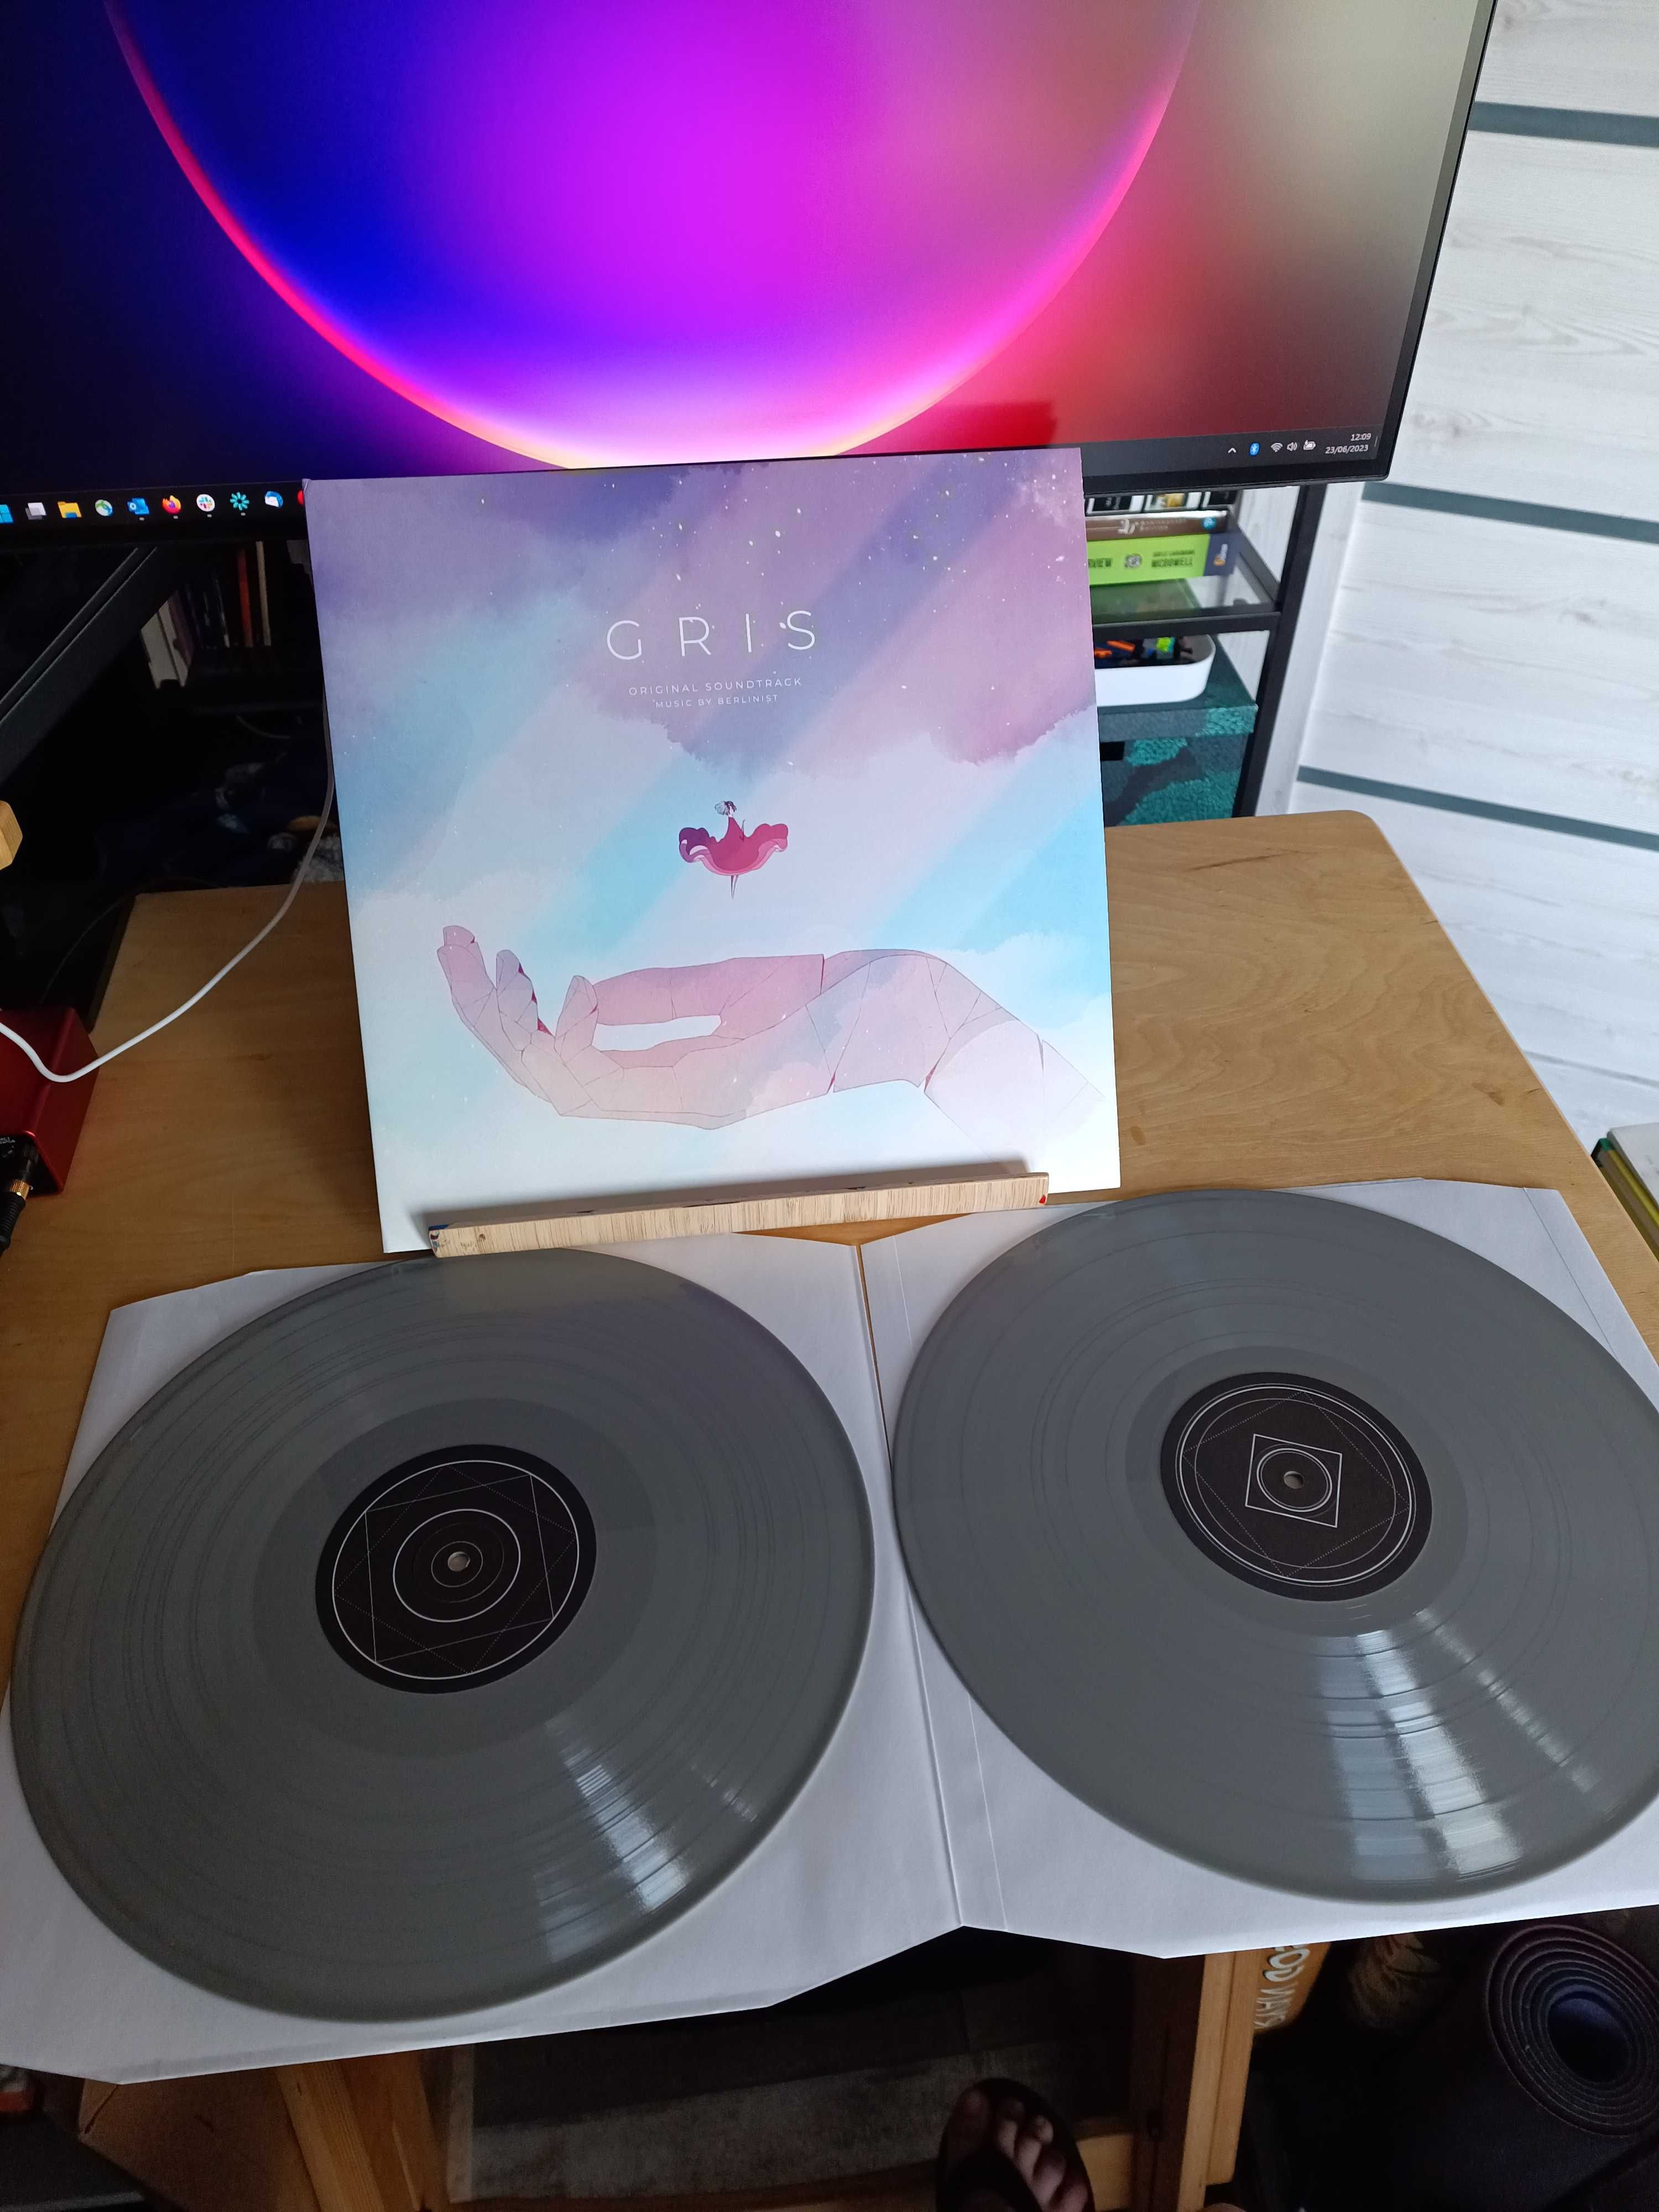 GRIS Soundtrack + Piano Collections [winyl]